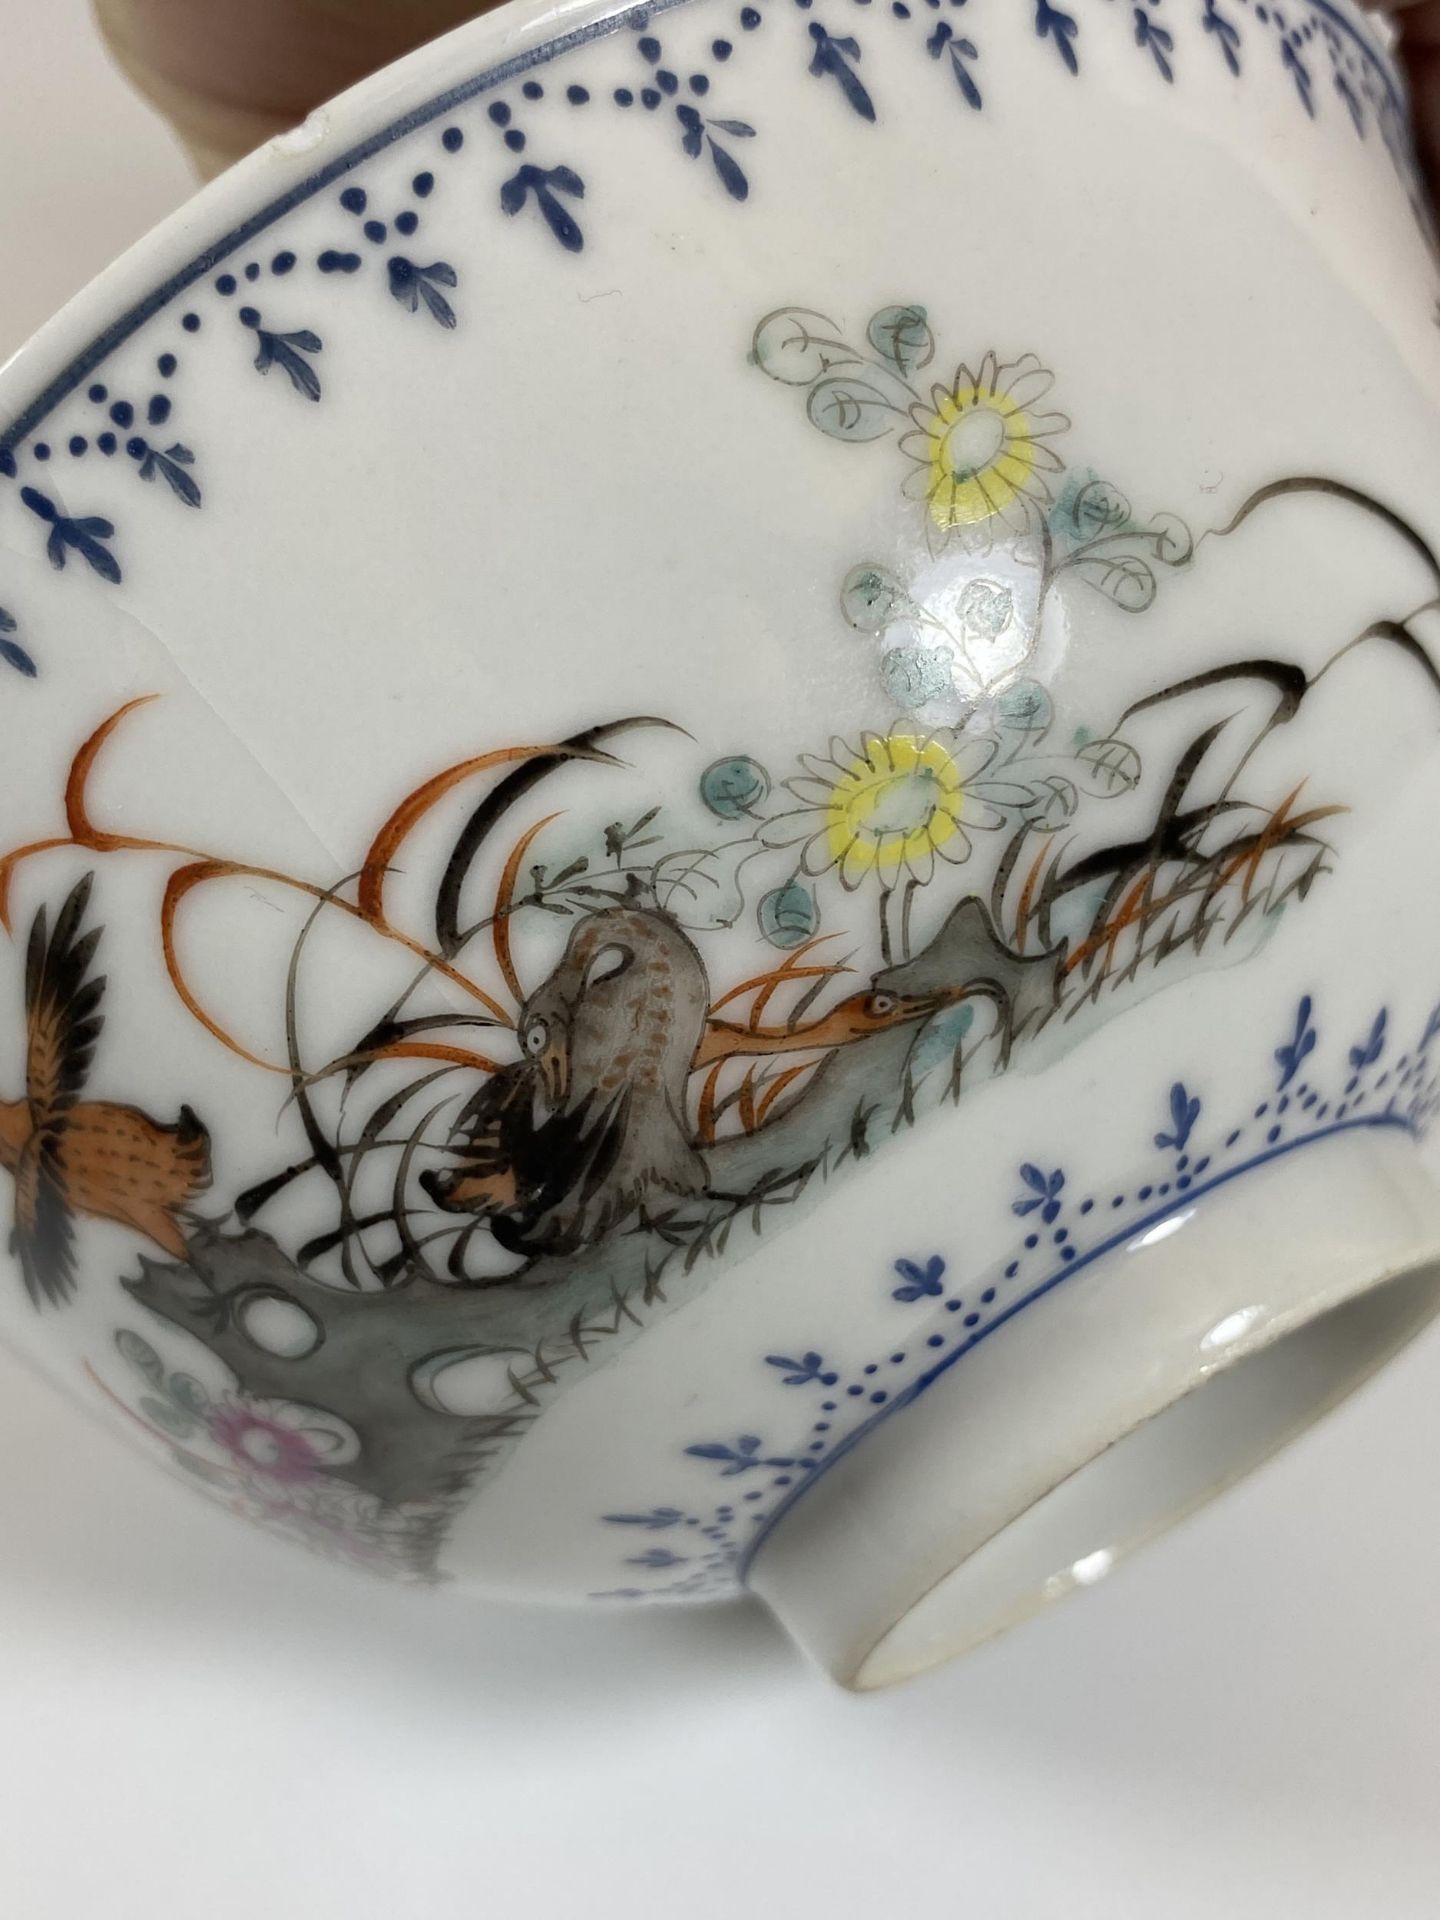 A CHINESE PORCELAIN BOWL WITH BIRD AND FLORAL DESIGN, QIANLONG SEAL MARK TO BASE, DIAMETER 12.5CM - Image 4 of 6